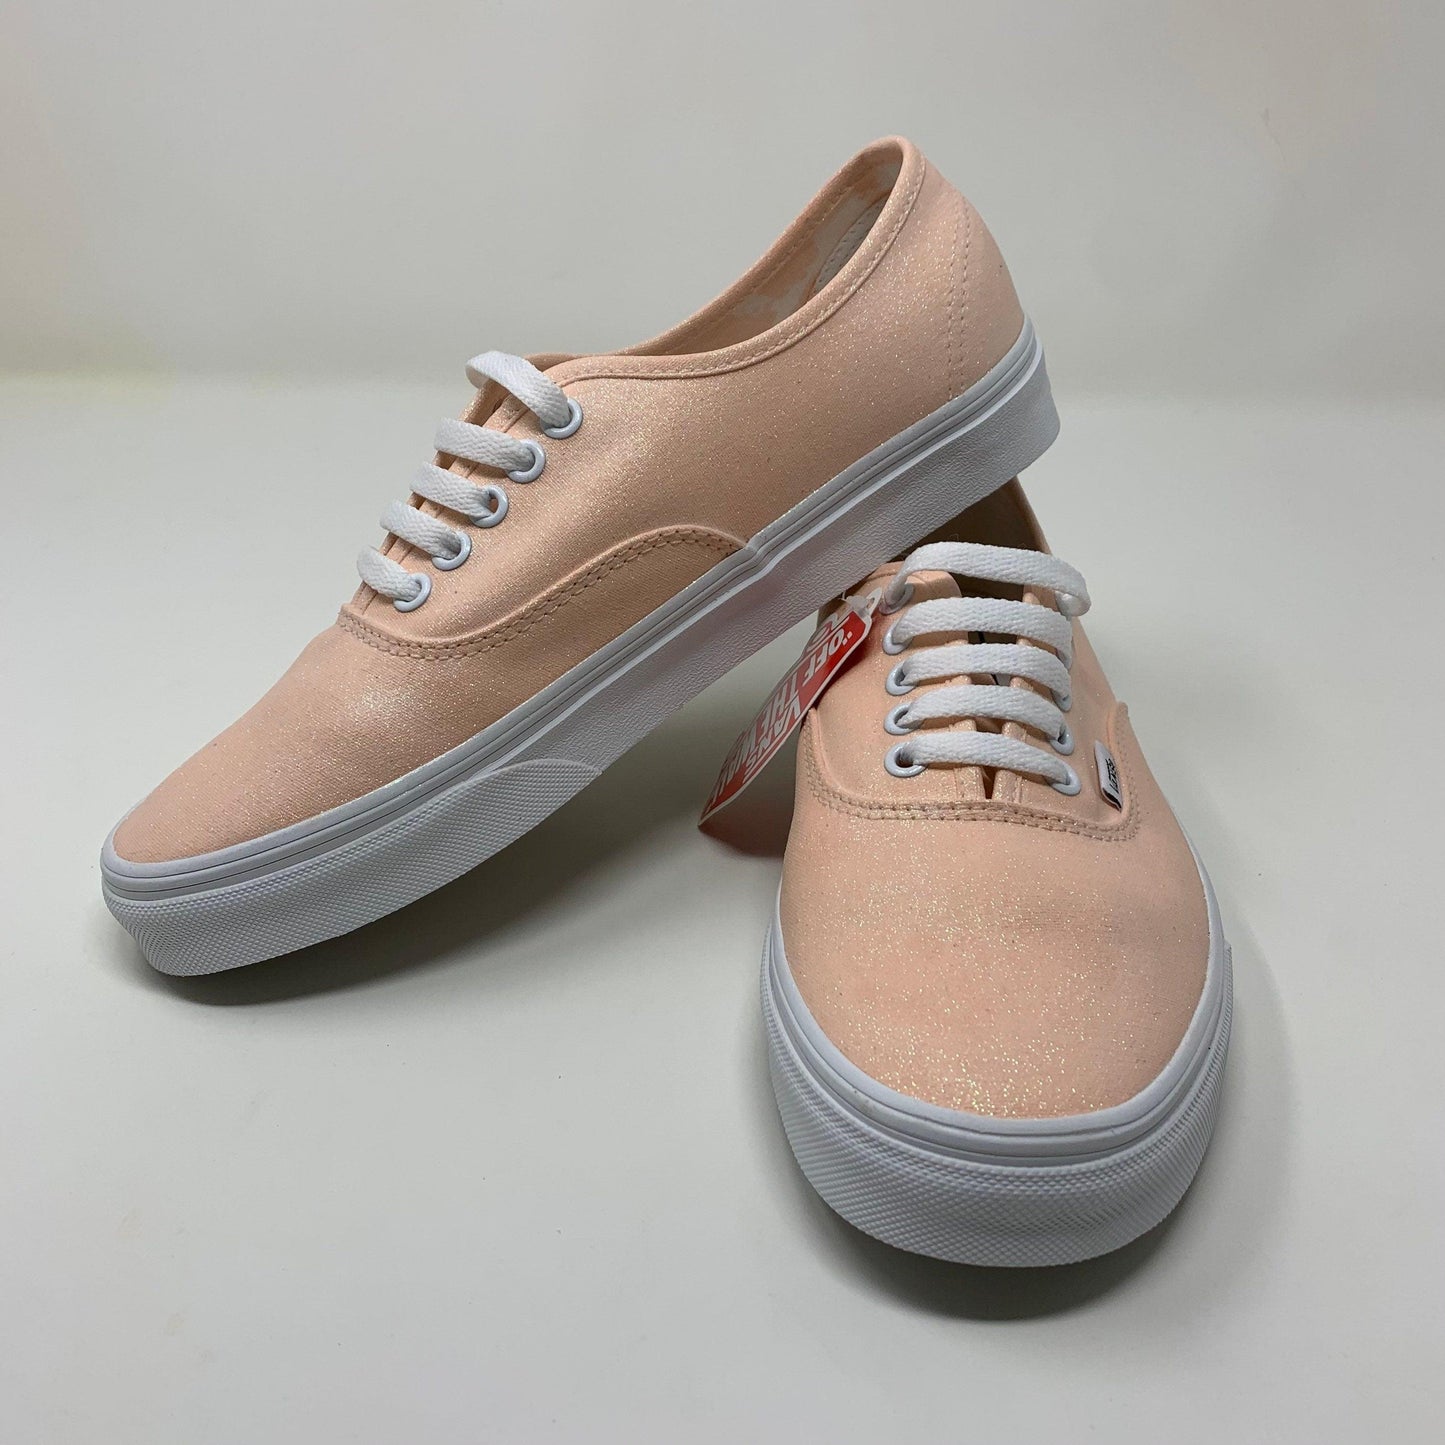 Peach Shoes - ButterMakesMeHappy